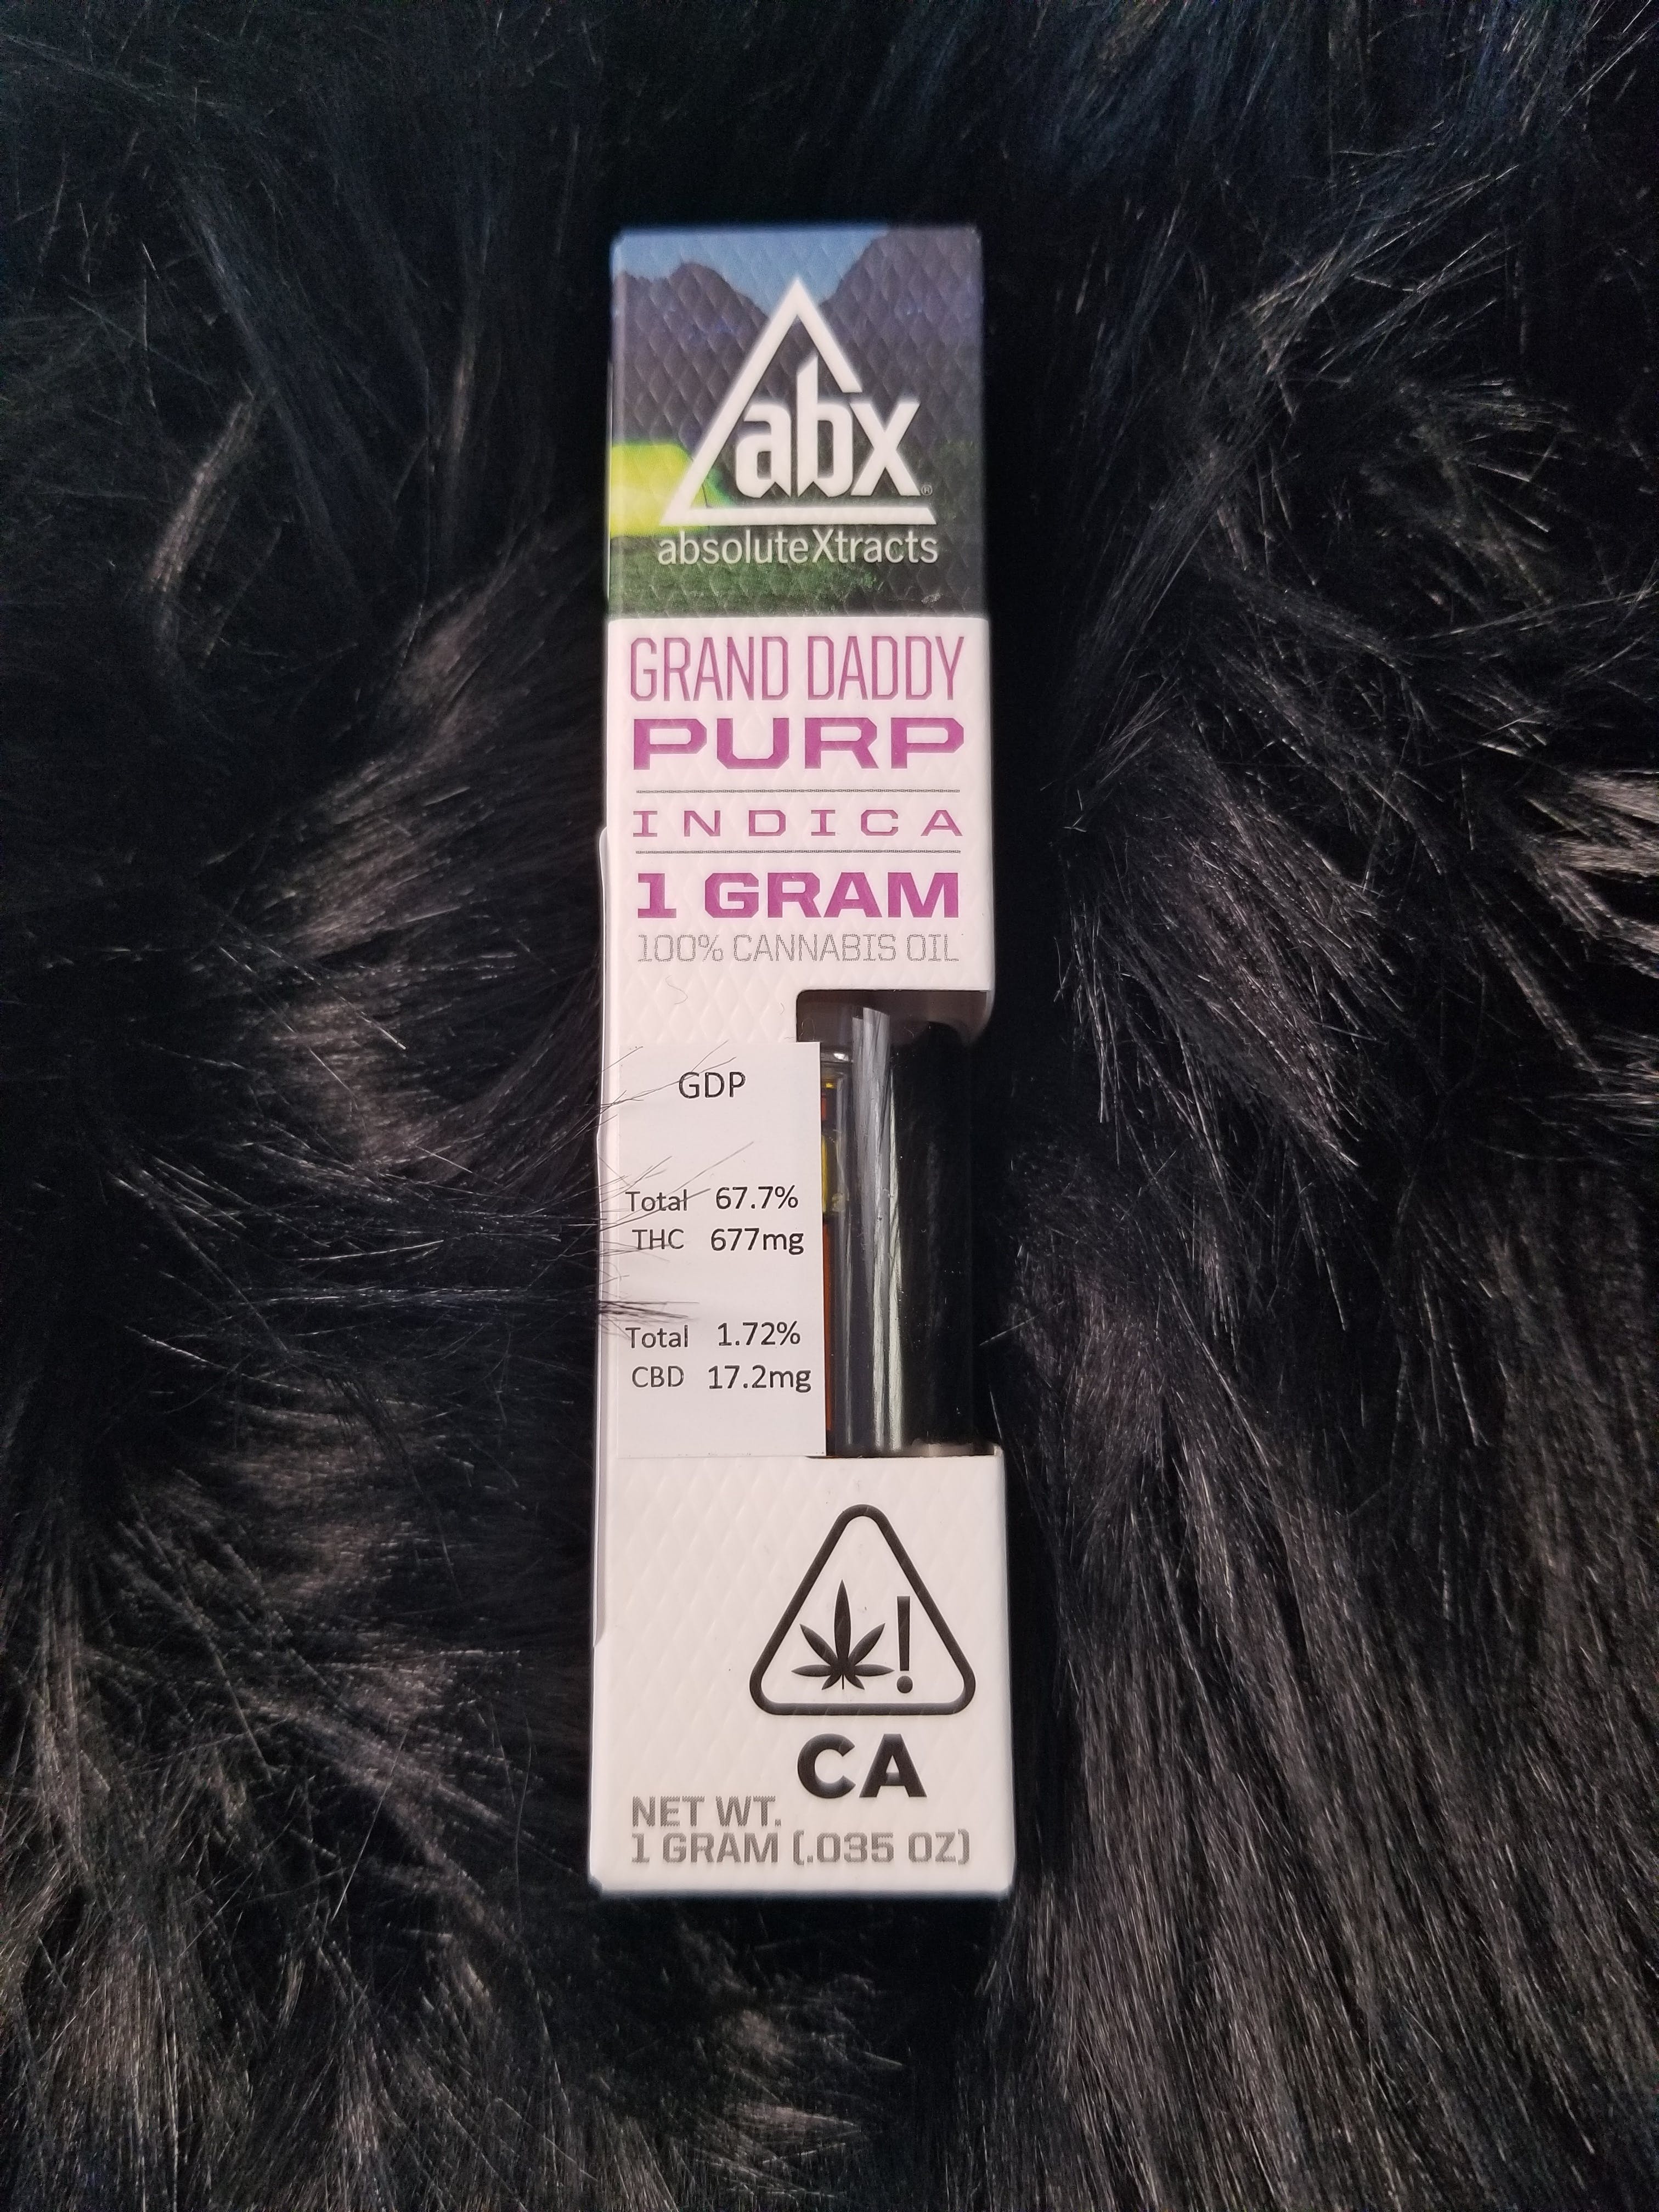 concentrate-abx-grand-daddy-purp-vape-cartridge-1-gram-indica-67-7-25thc